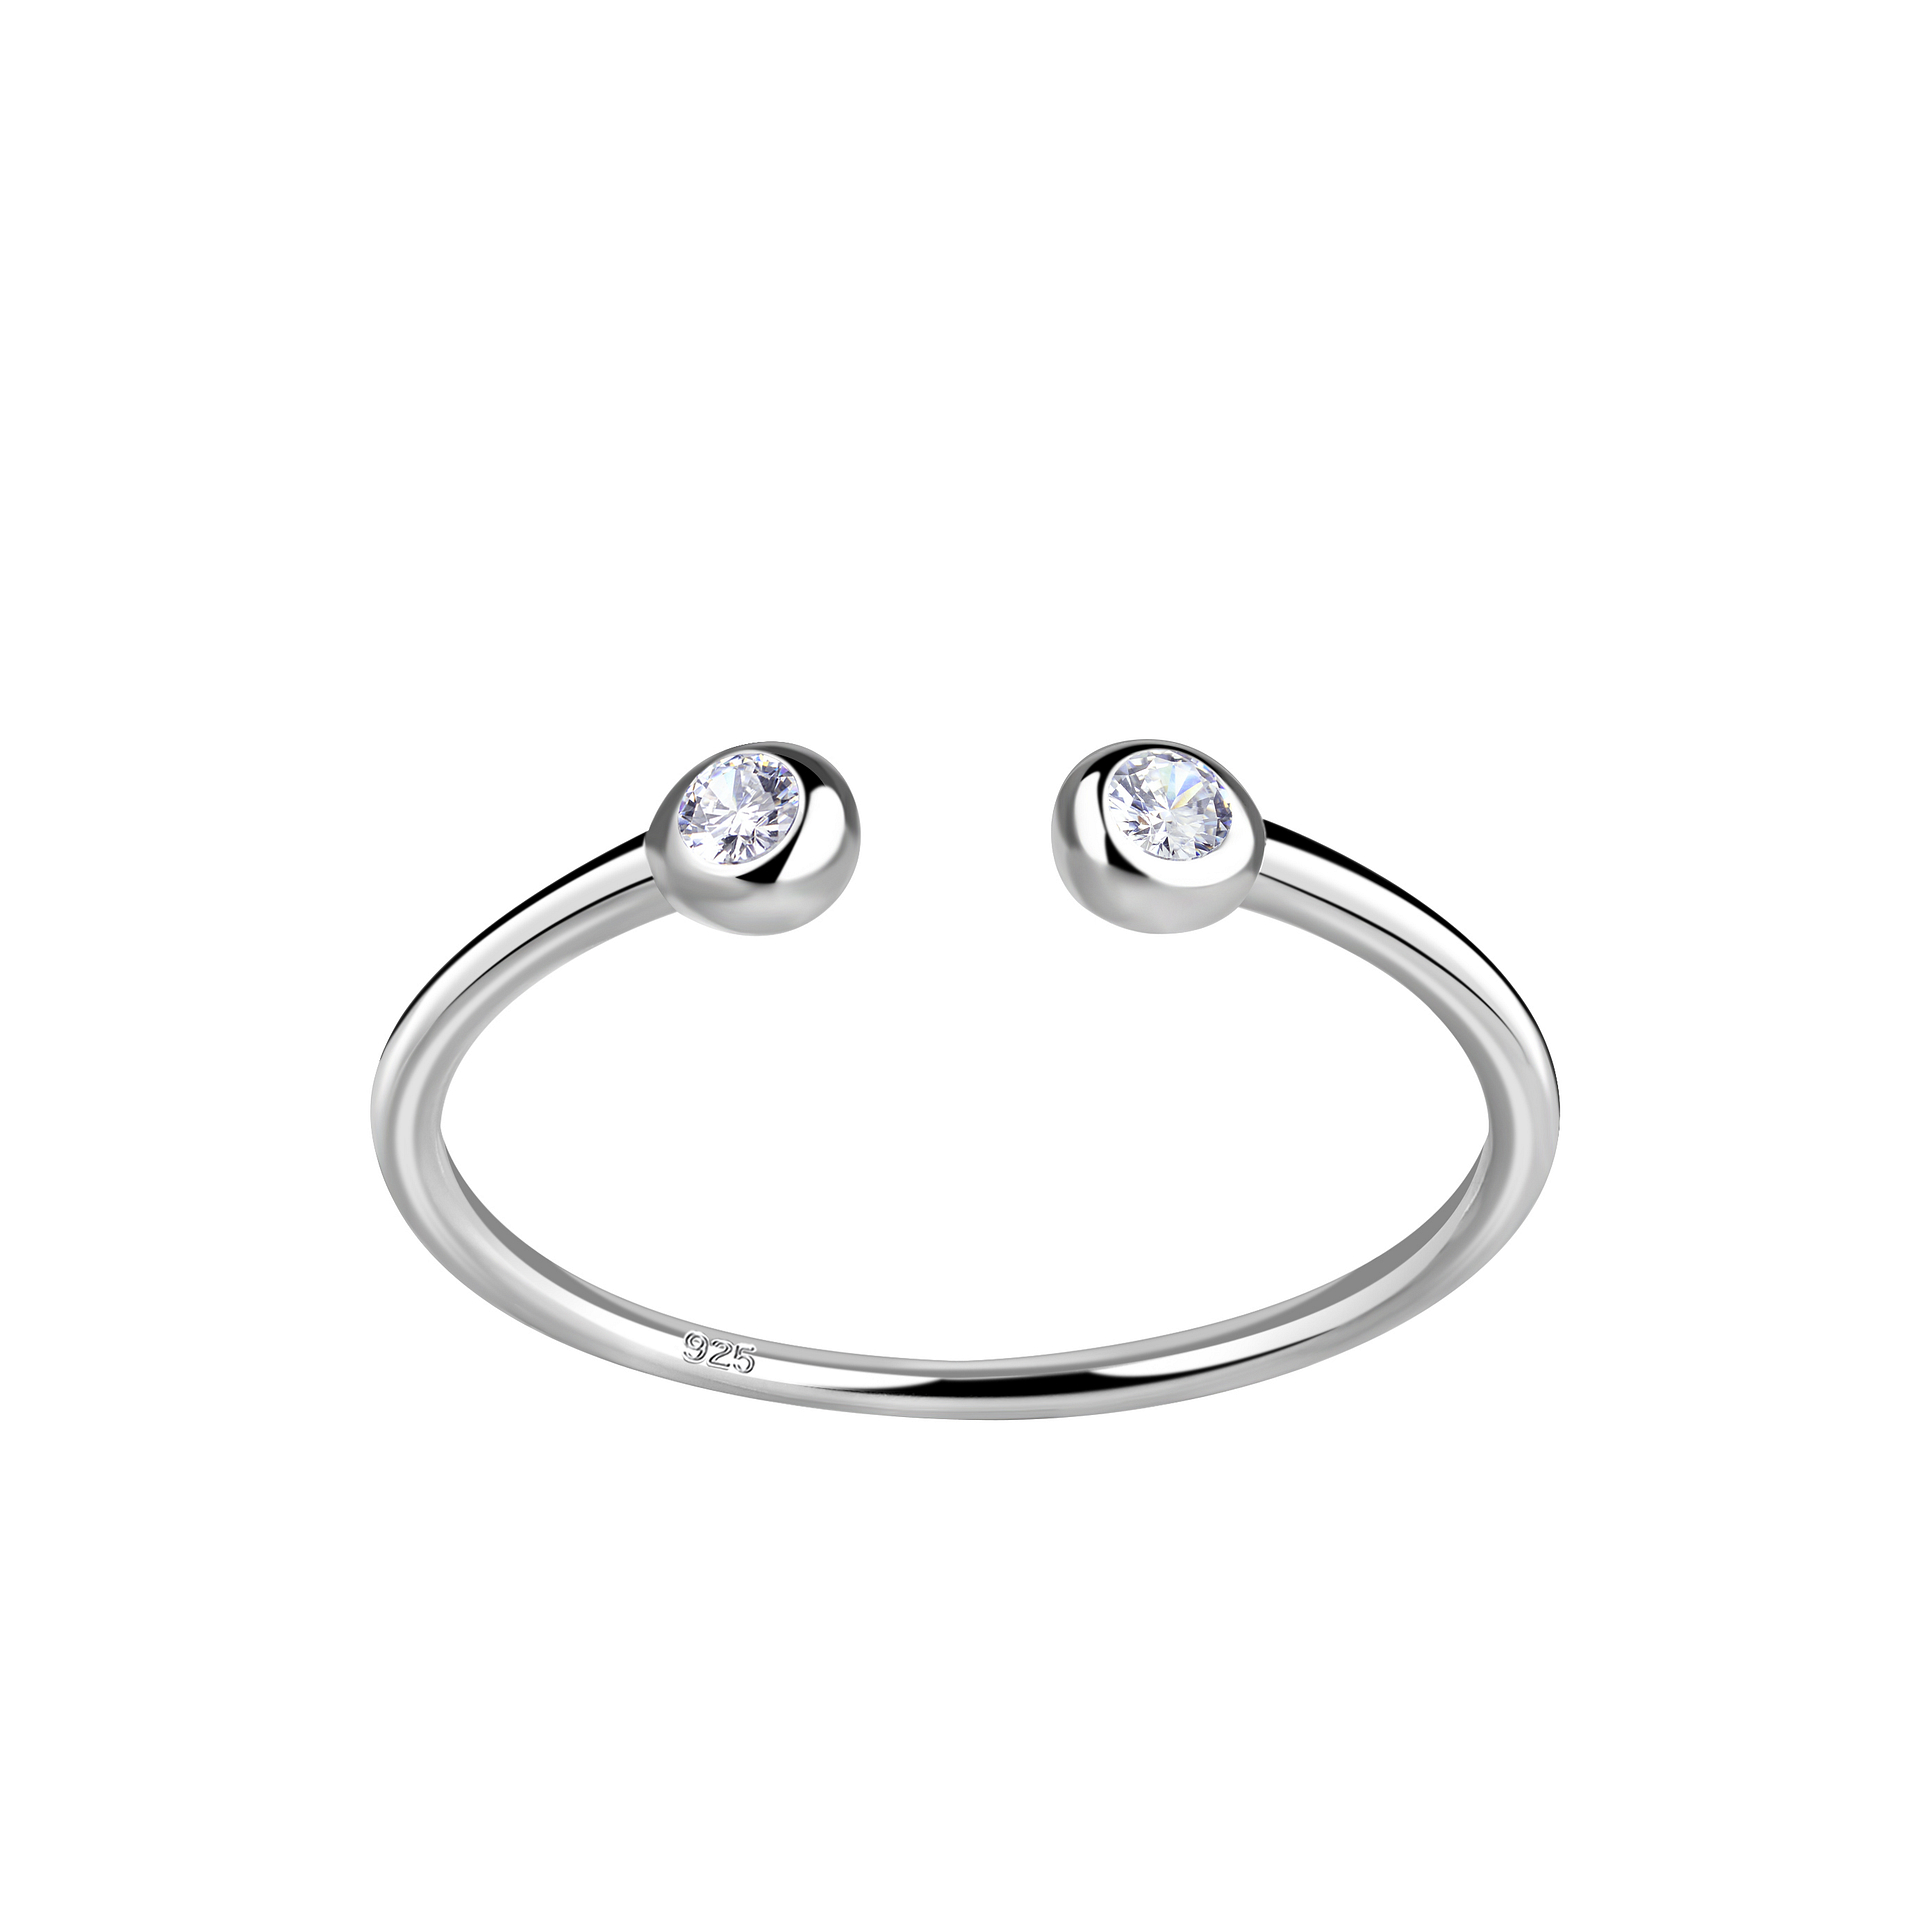 925 Sterling Silver Toe-rings pack of 5 Pairs Set 14 